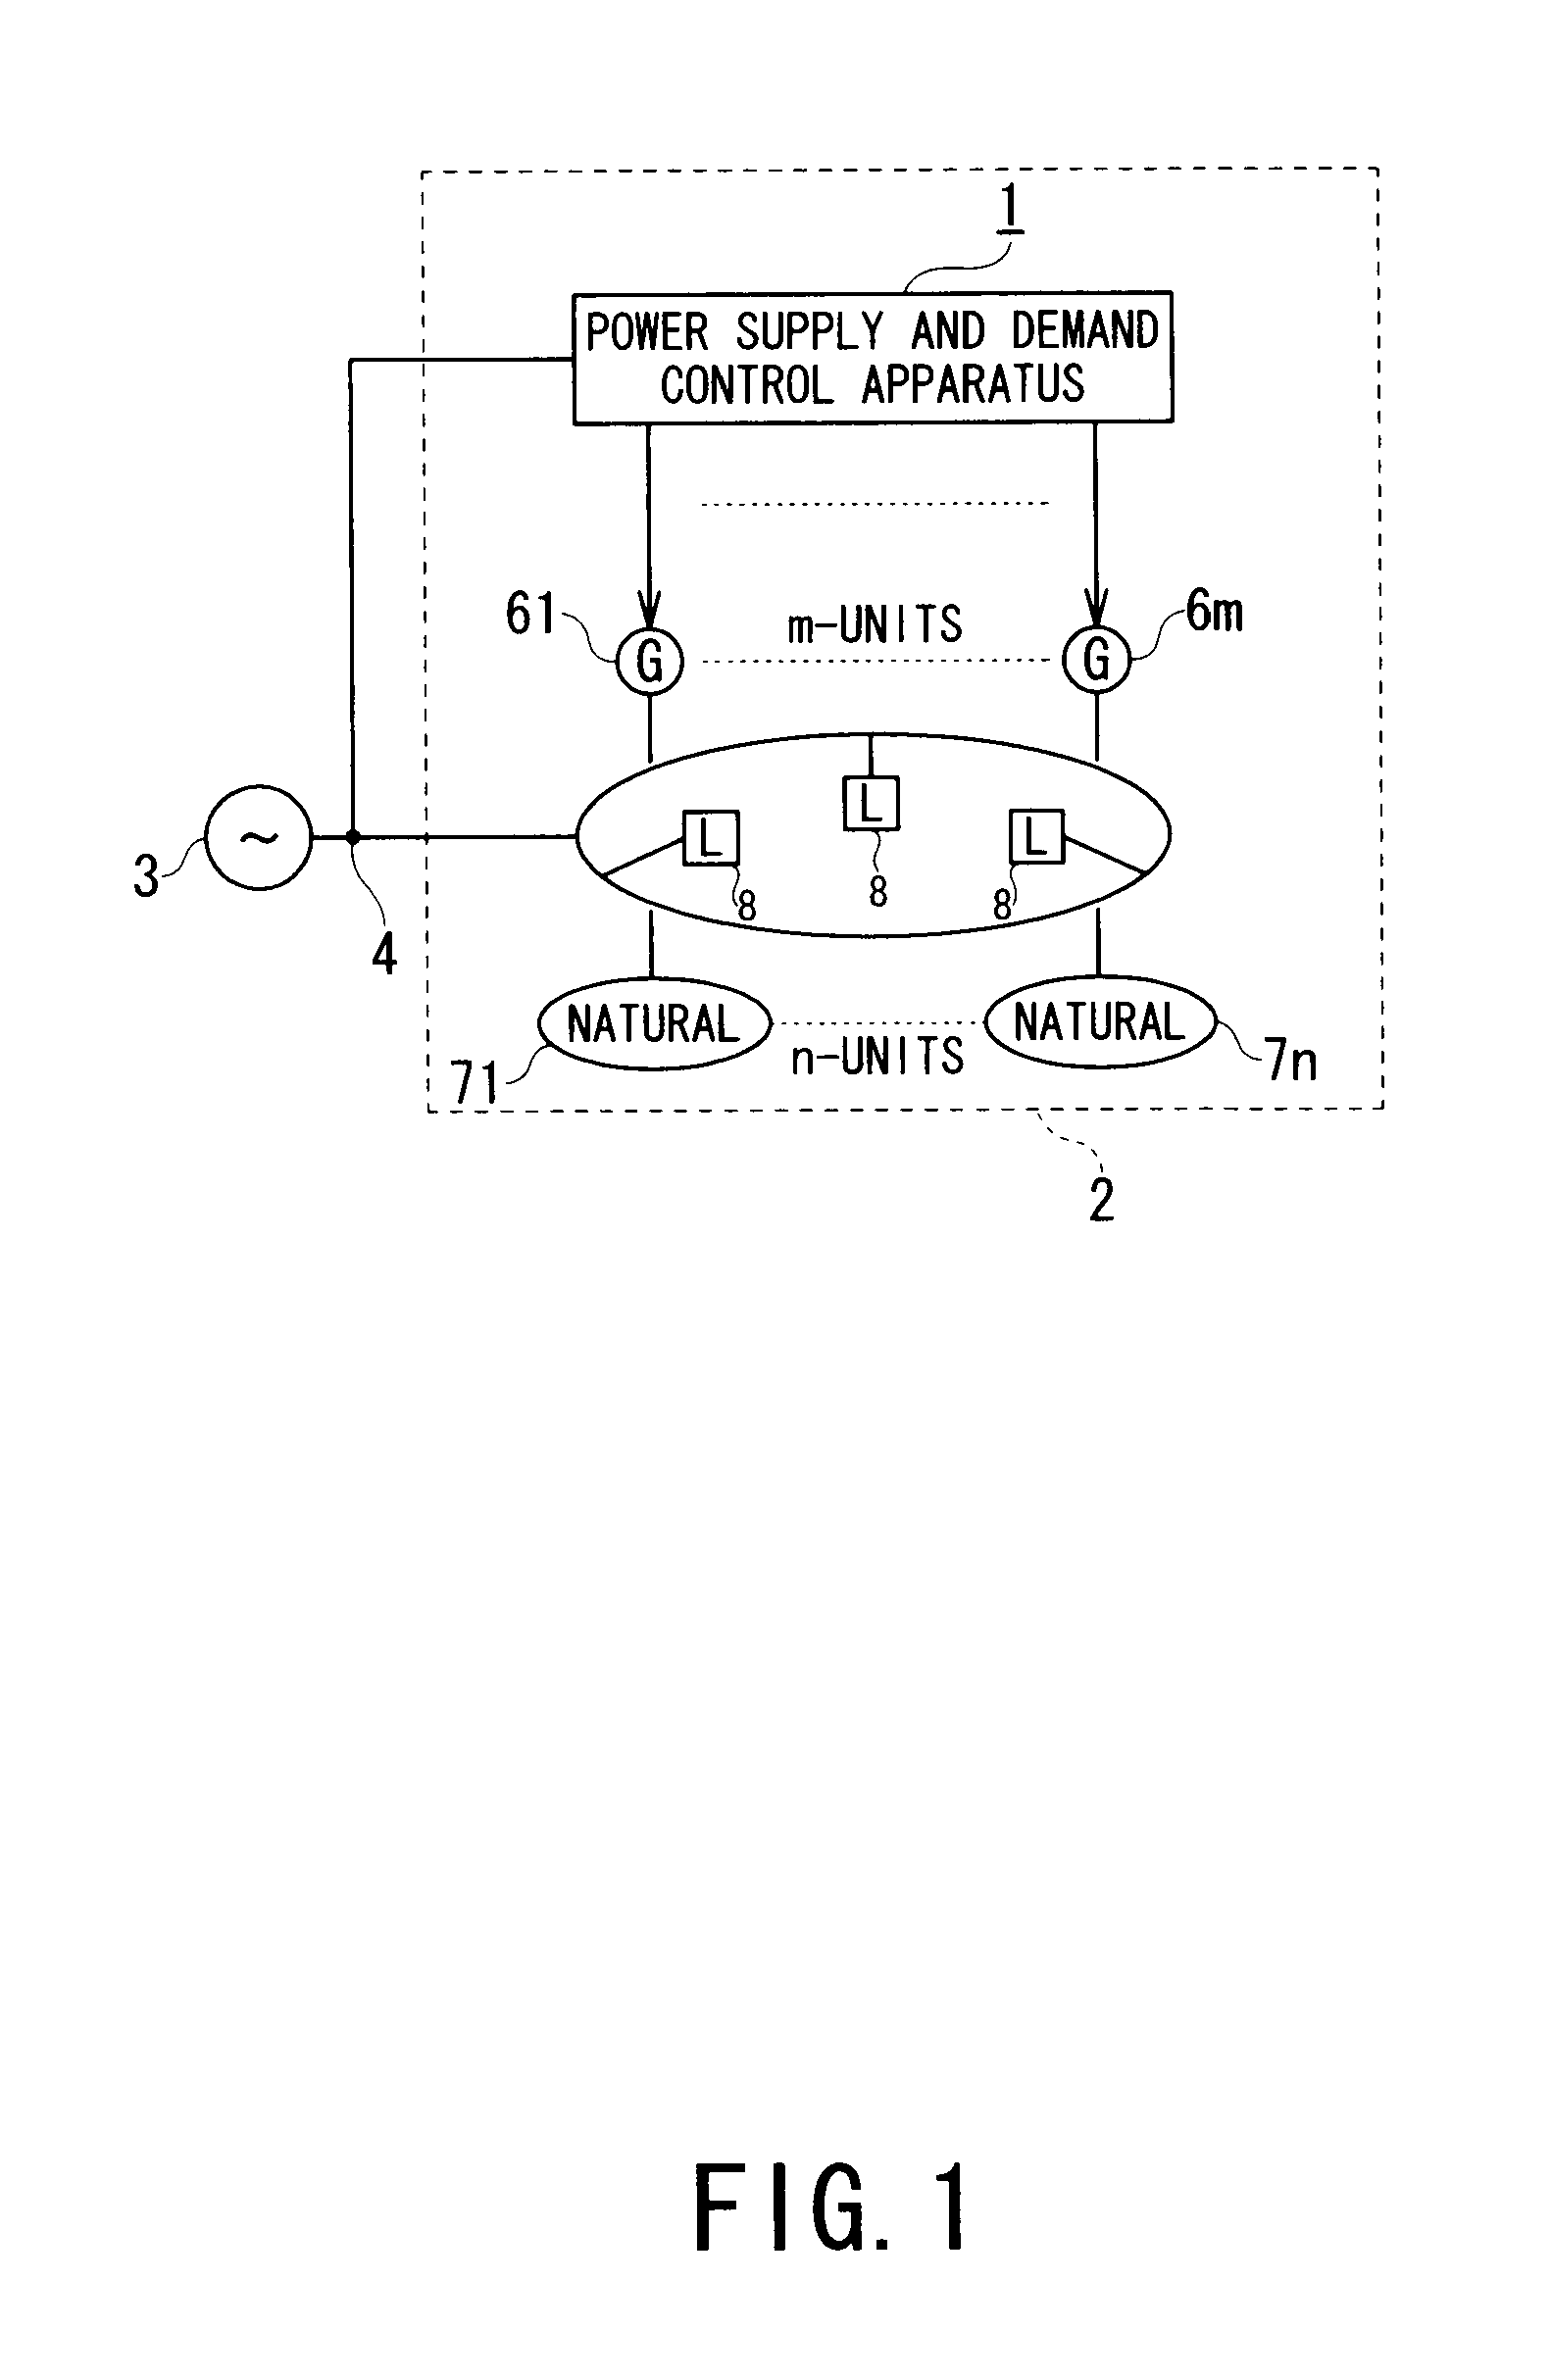 Power supply and demand control apparatus and power supply and demand control method